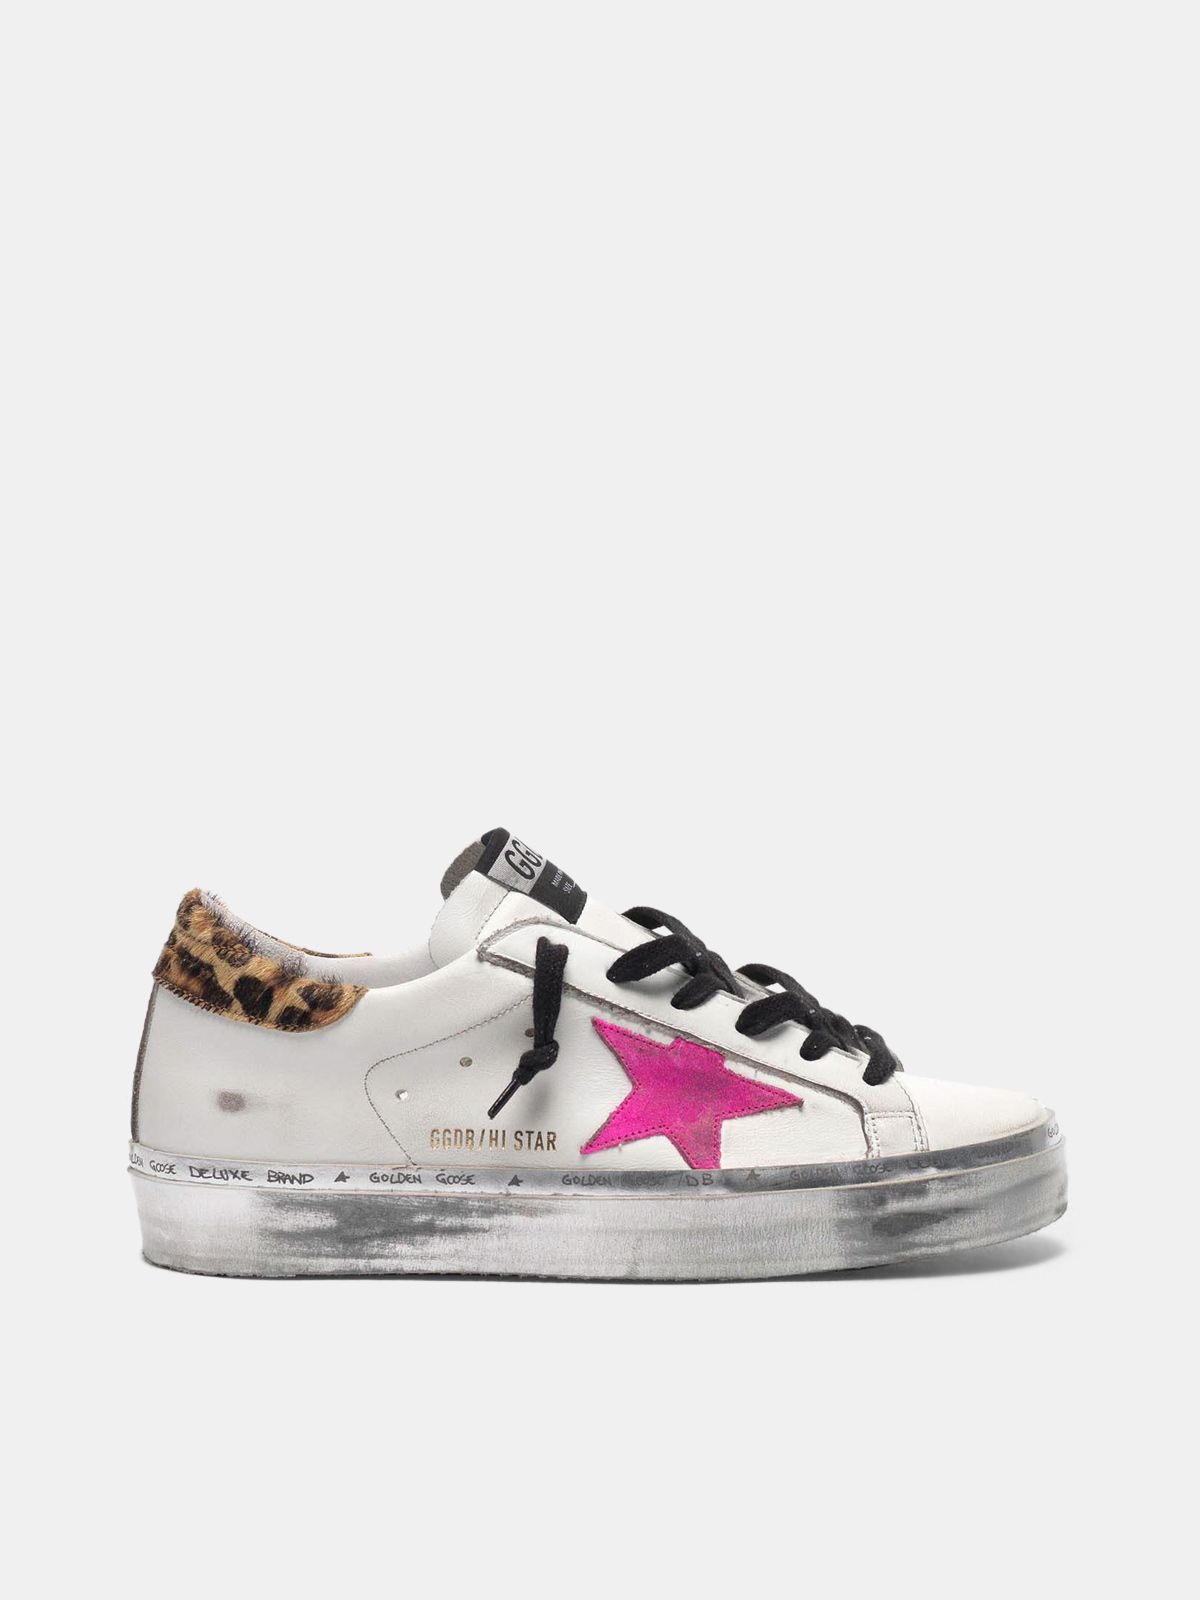 golden goose heel sneakers Hi with star and leopard-print fuchsia tab Star